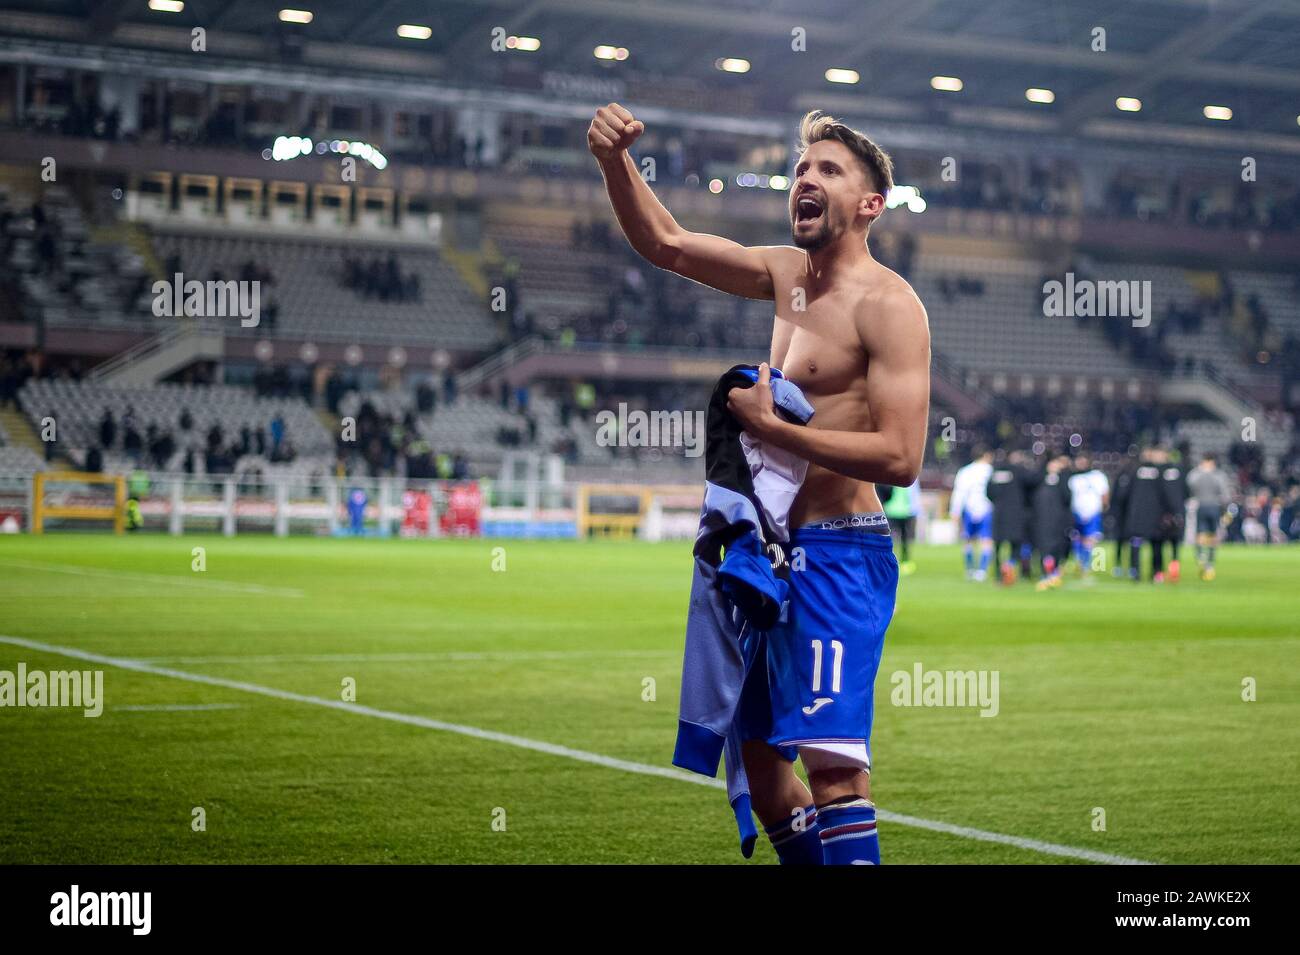 Turin, Italy - 08 February, 2020: Gaston Ramirez of UC Sampdoria celebrates the victory at the end of the Serie A football match between Torino FC and UC Sampdoria. UC Sampdoria won 3-1 over Torino FC. Credit: Nicolò Campo/Alamy Live News Stock Photo